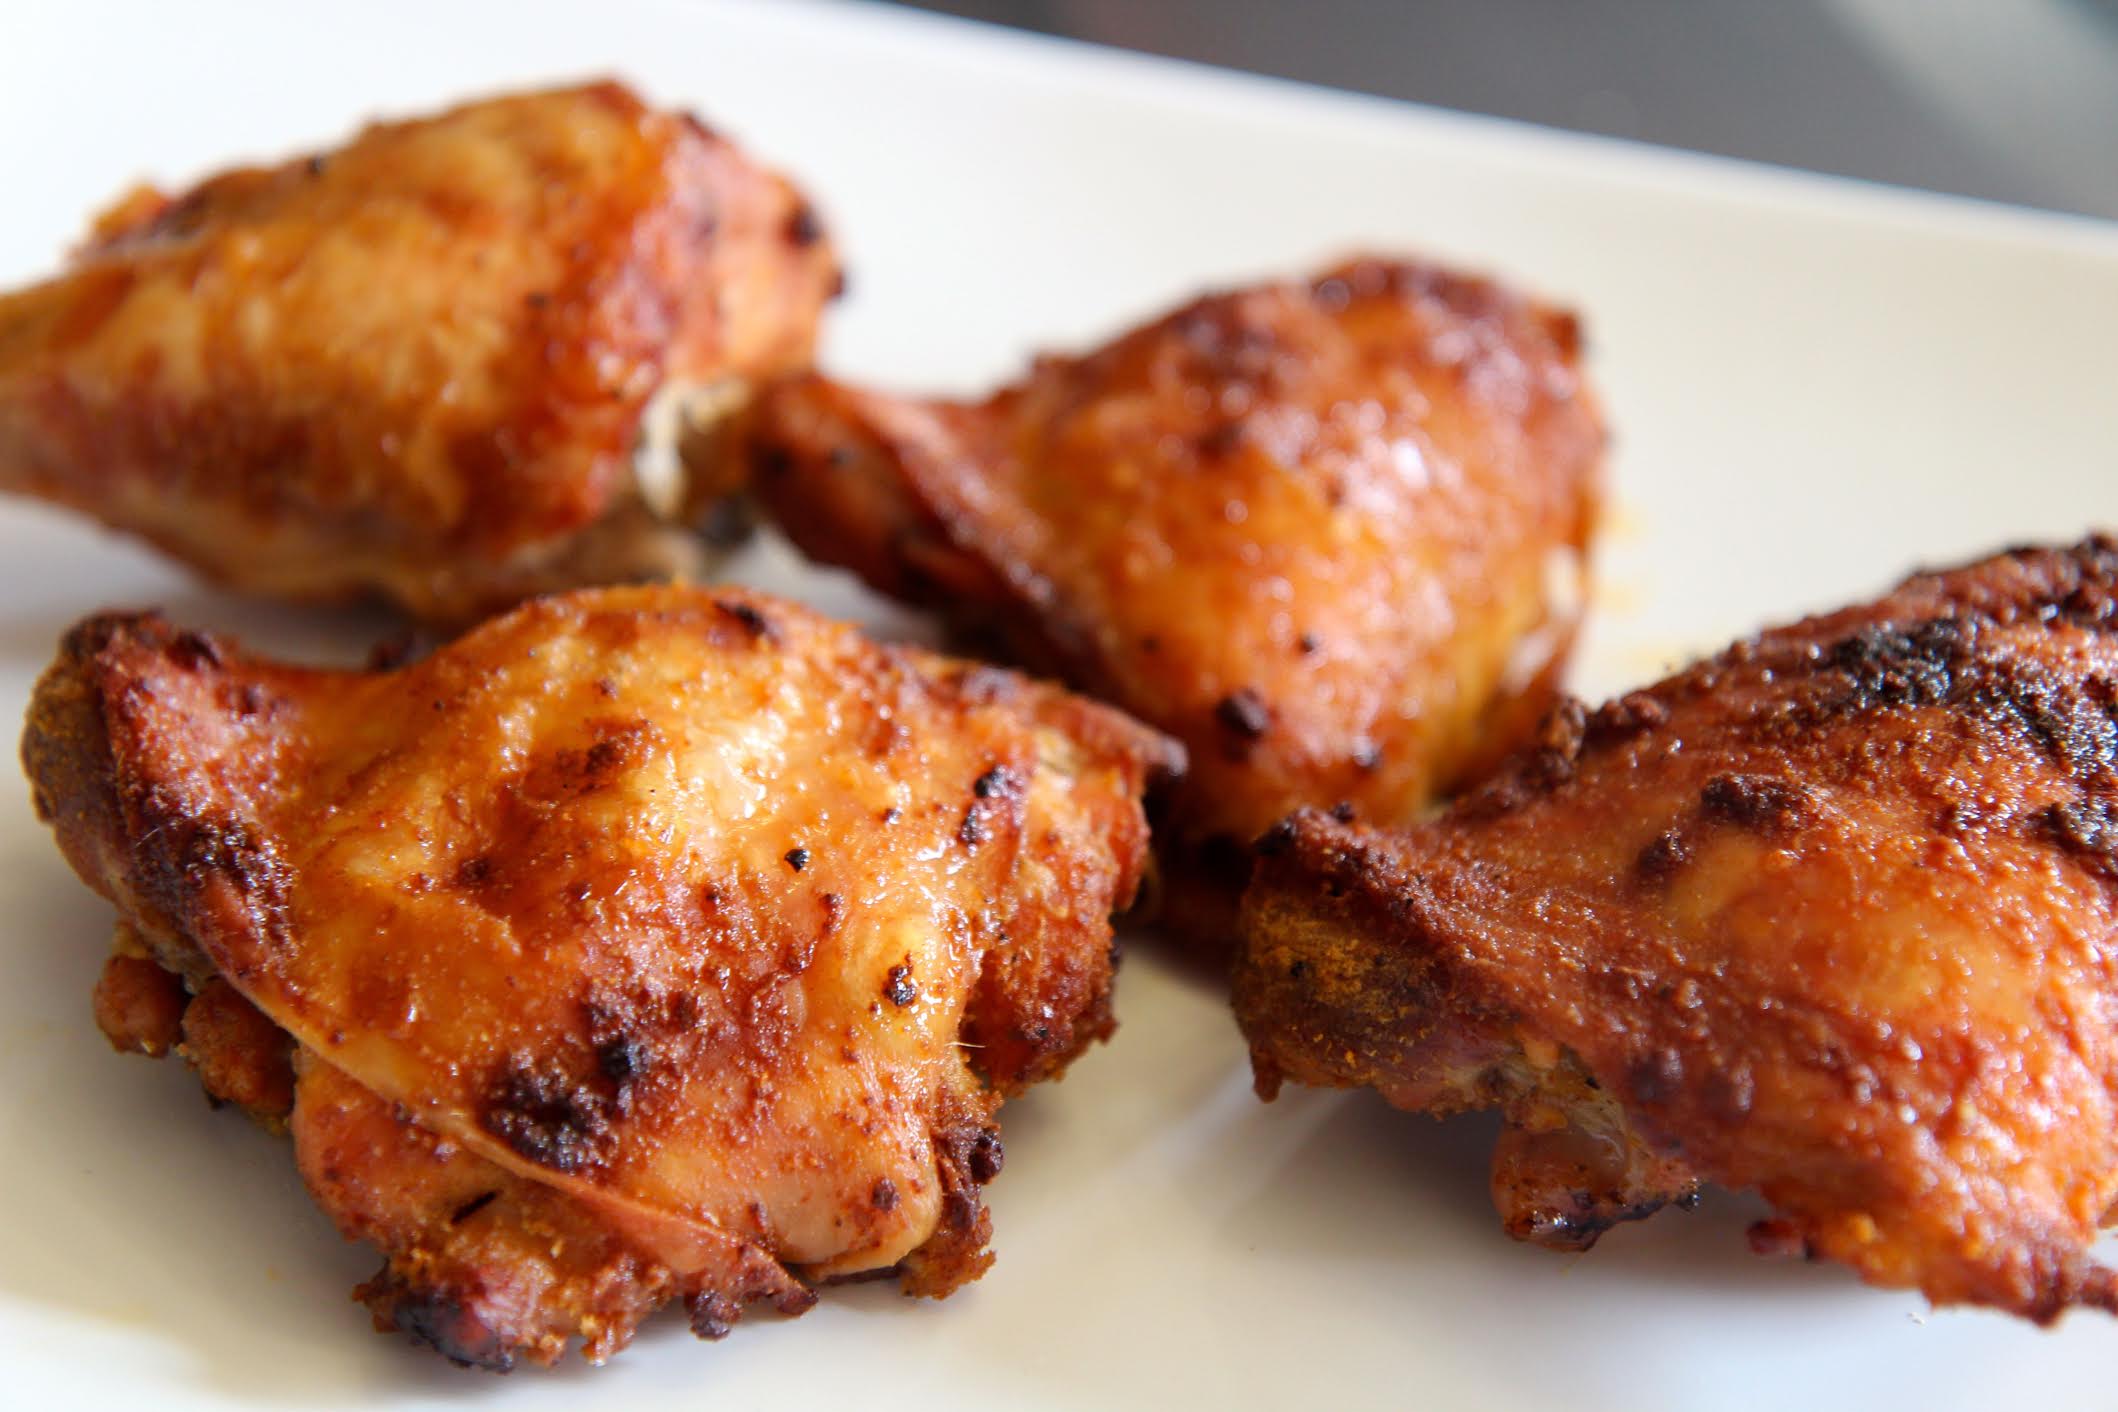 This smoked paprika chicken recipe gives a little bit of a kick and a lot of great flavor